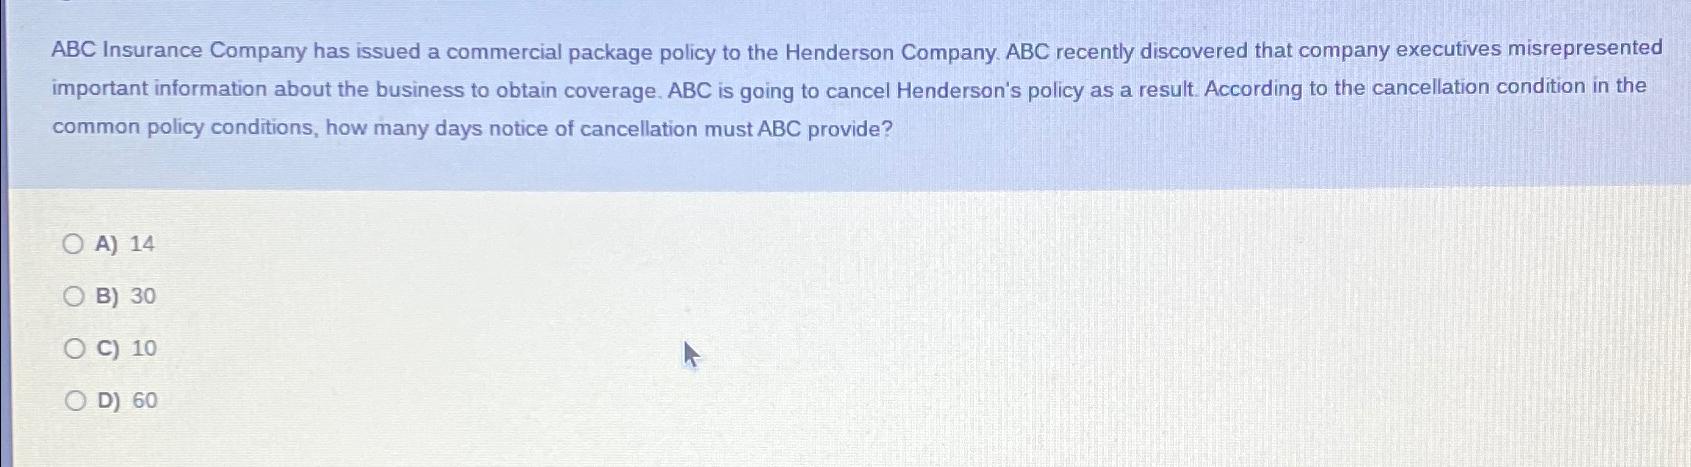 ABC Insurance Company has issued a commercial package policy to the Henderson Company. ABC recently